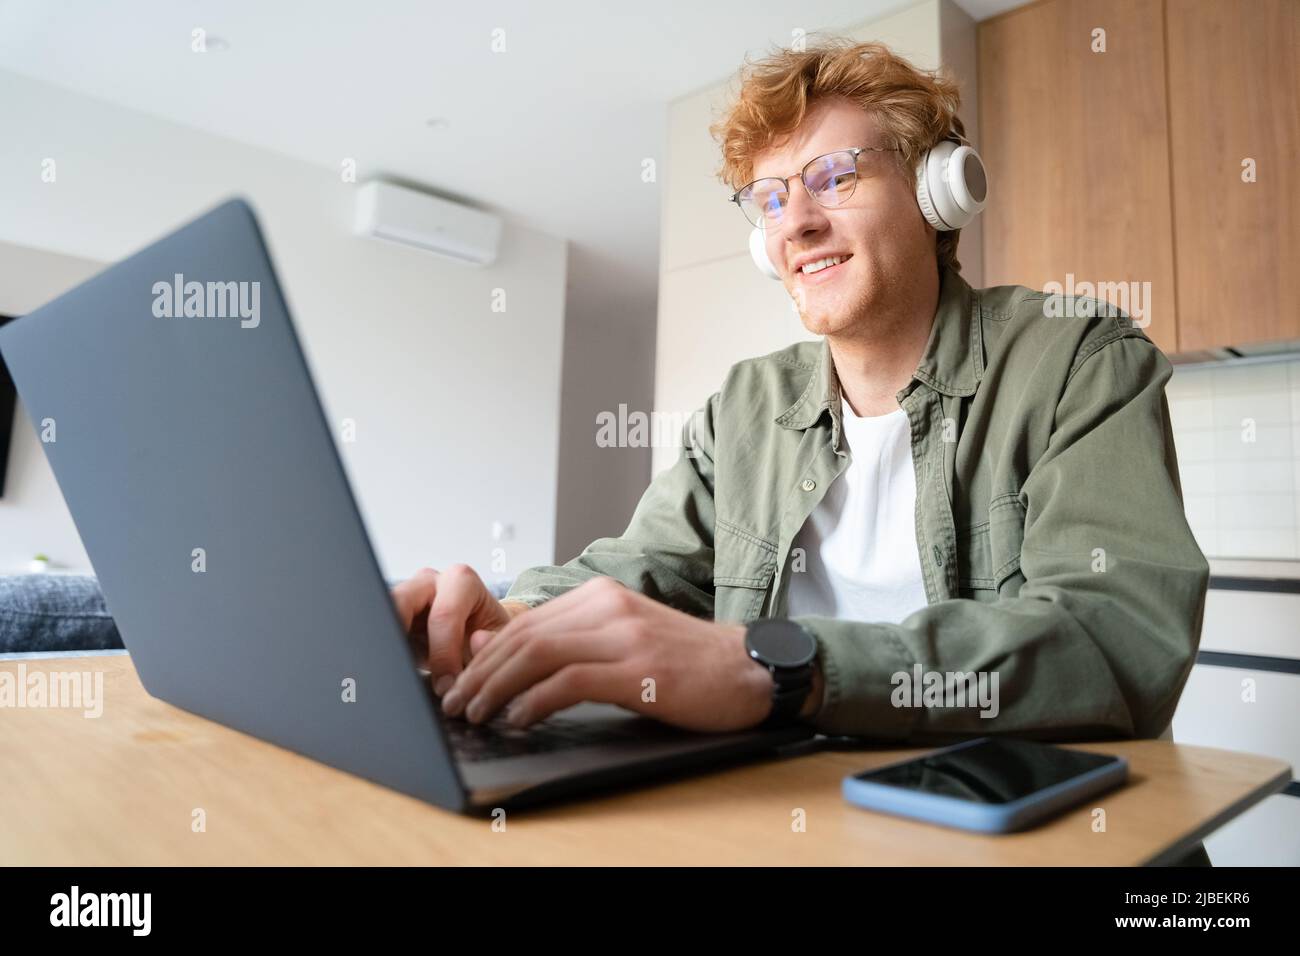 Young ginger man gamer playing video game, doing business videocall on laptop Stock Photo